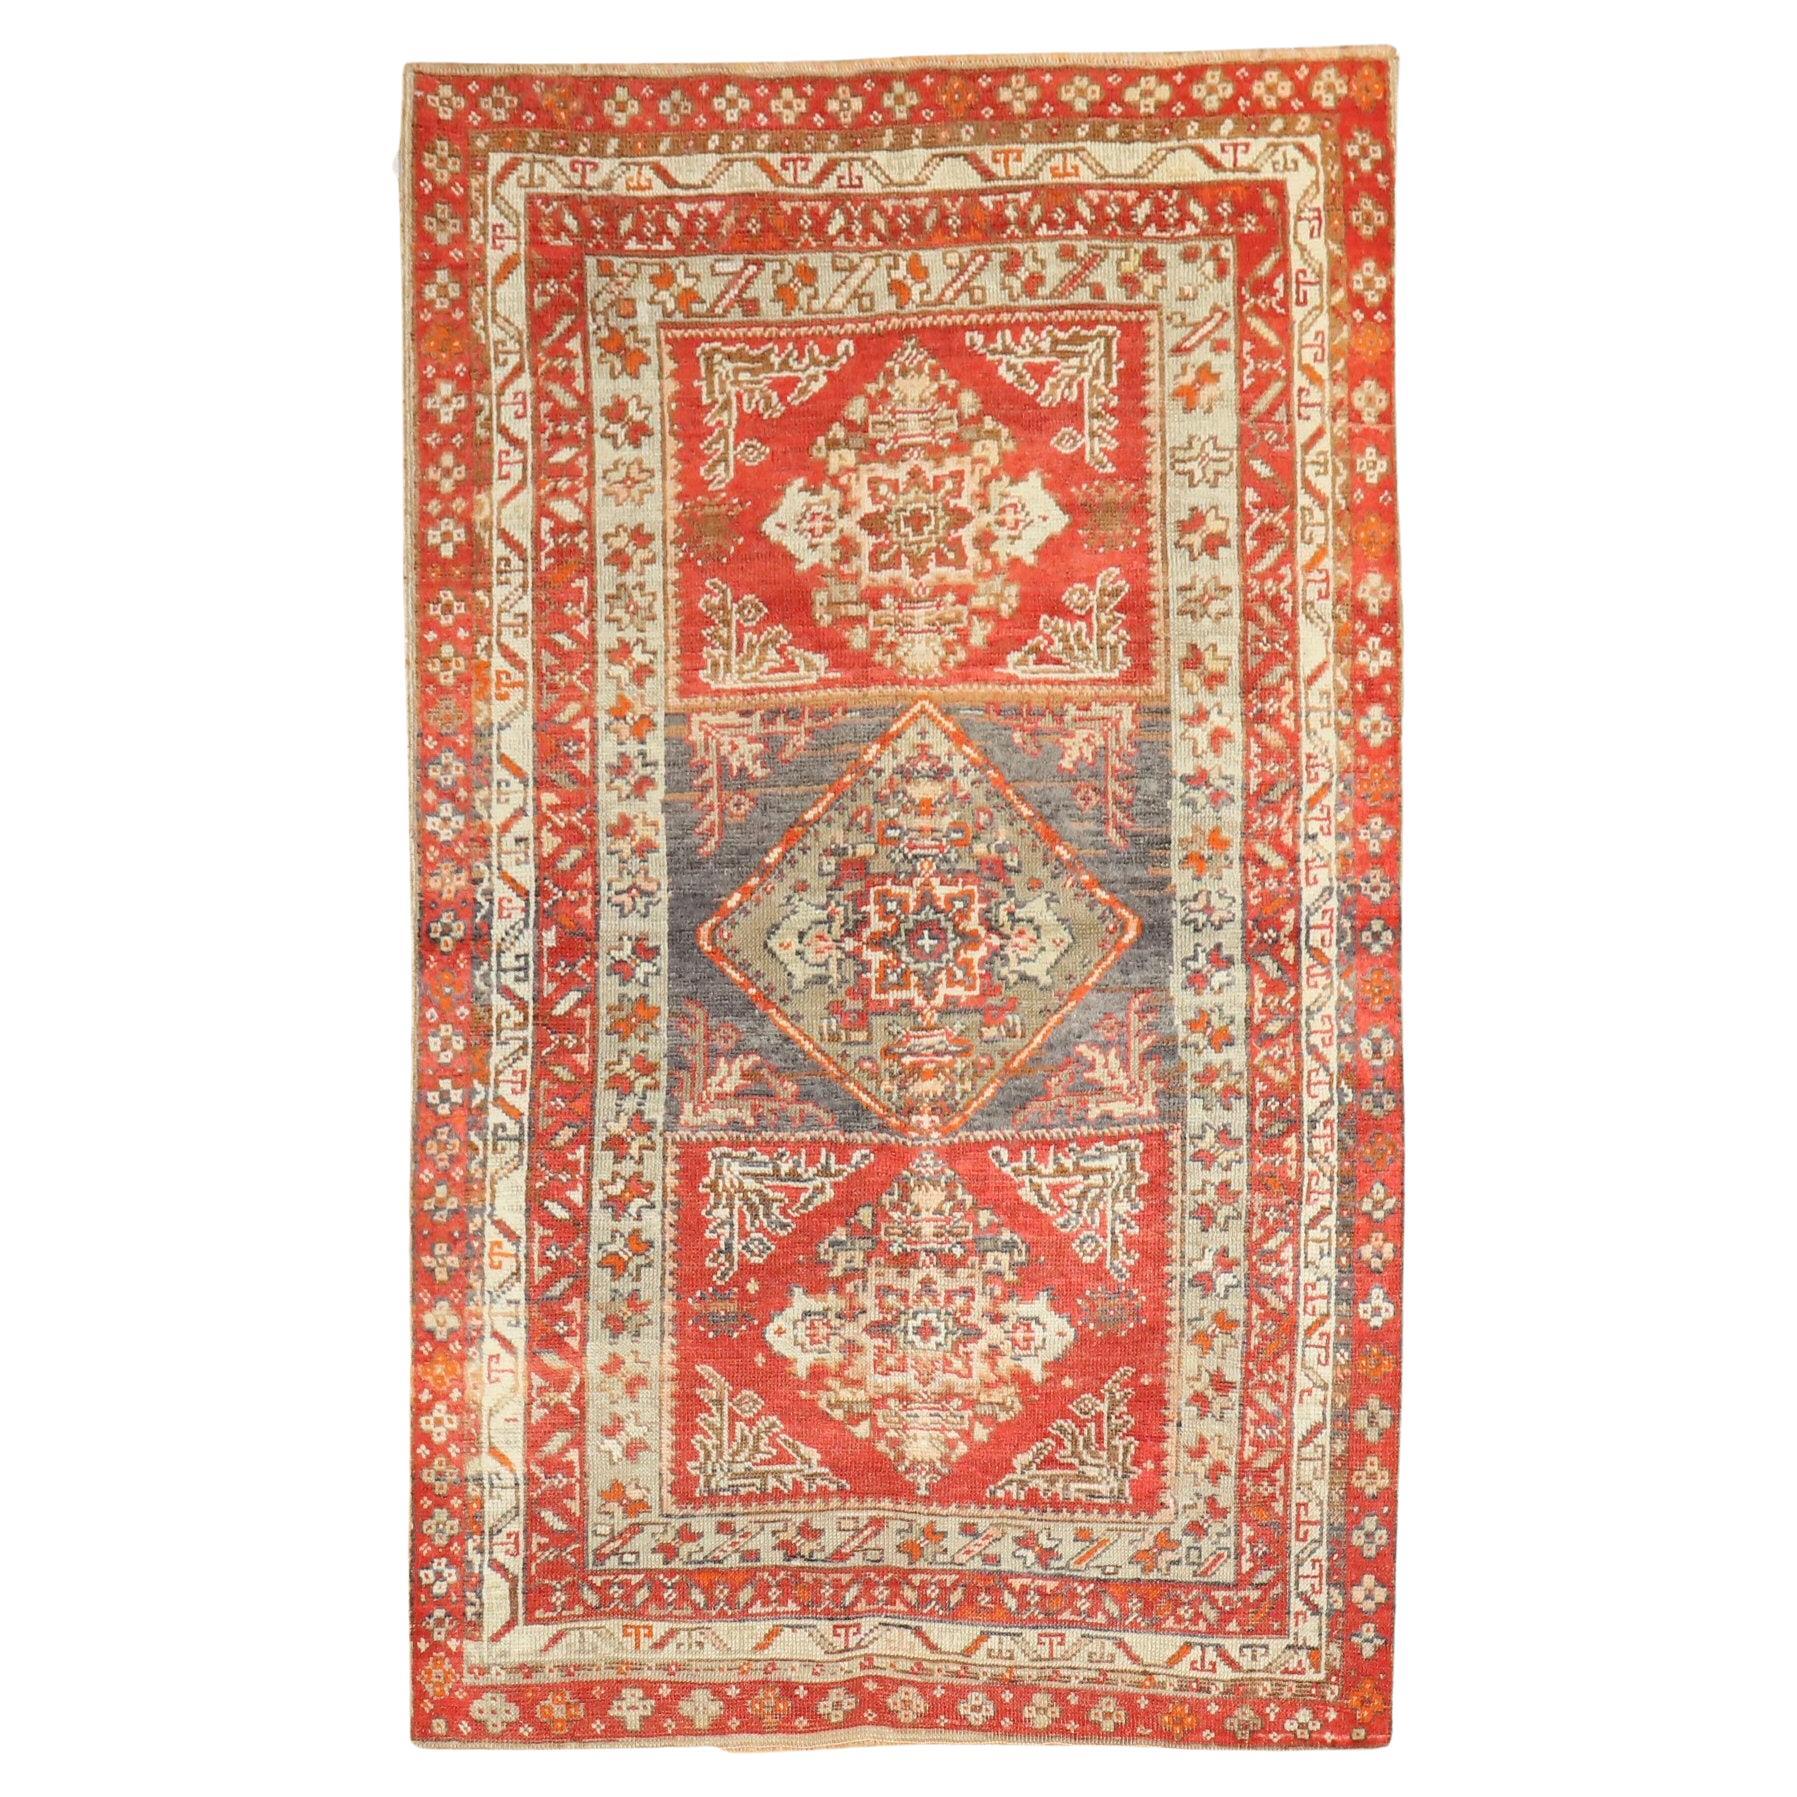 A finer quality early 20th century Turkish Sivas rug.

3' x 4'9''